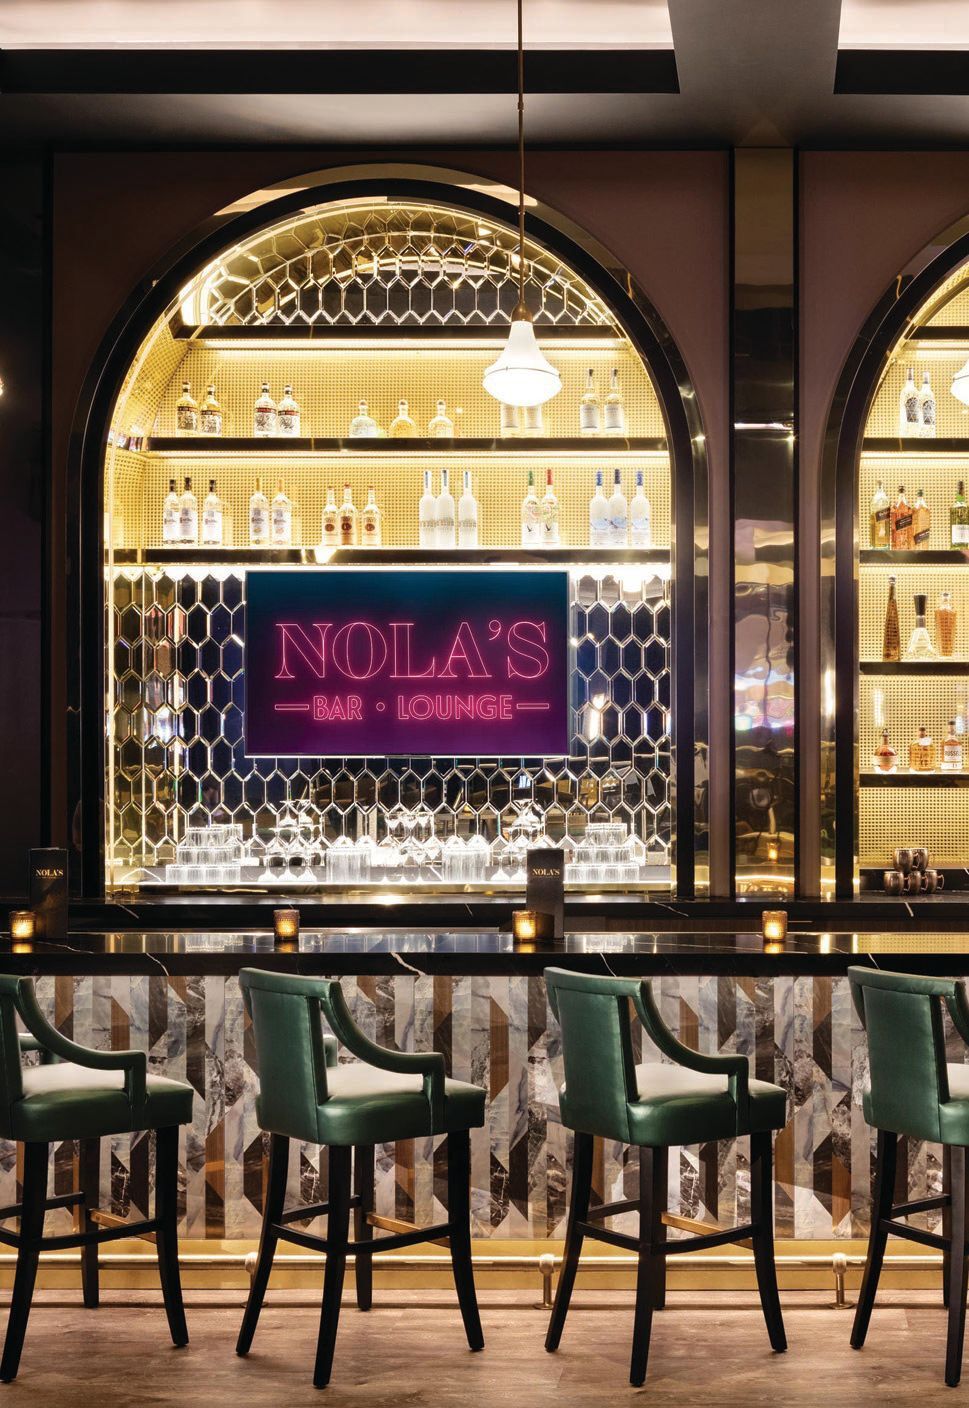 Visit Nola’s during your stay at Ocean Casino Resort PHOTO COURTESY OF PROPERTY